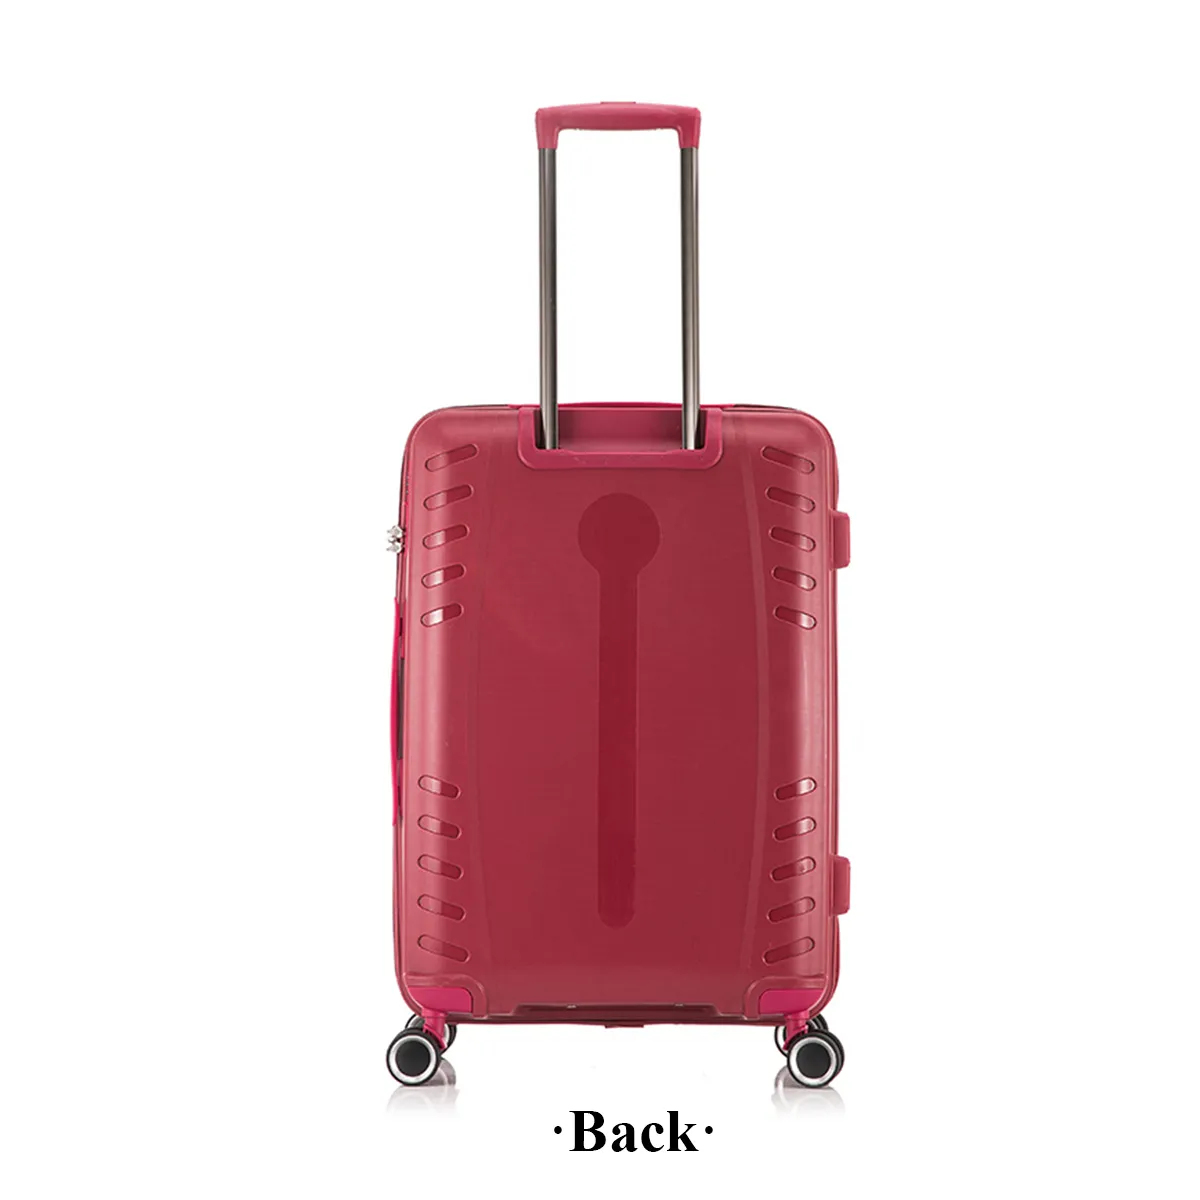 GOOD DESIGN LIGHT WEIGHT UNBREAKABLE SUITCASES PP TROLLEY LUGGAGE TRAVEL FASHION TROLLEY